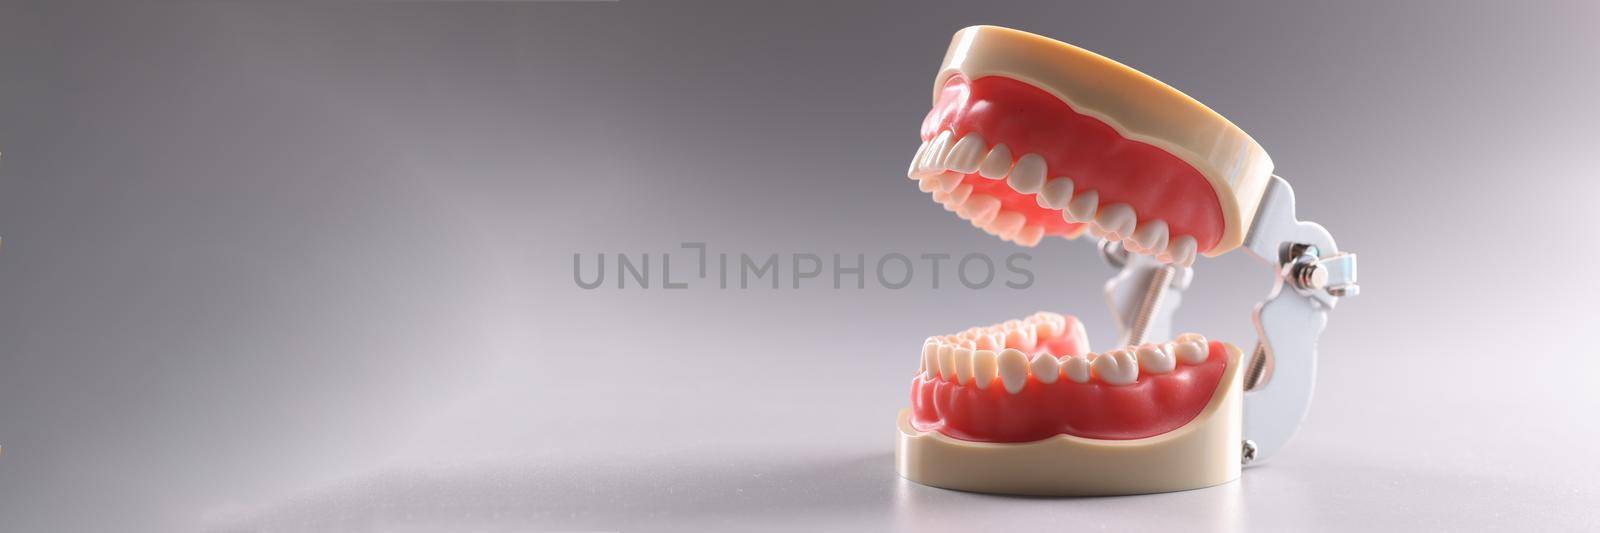 Artificial plastic model of human jaw on gray background closeup. Dental care concept